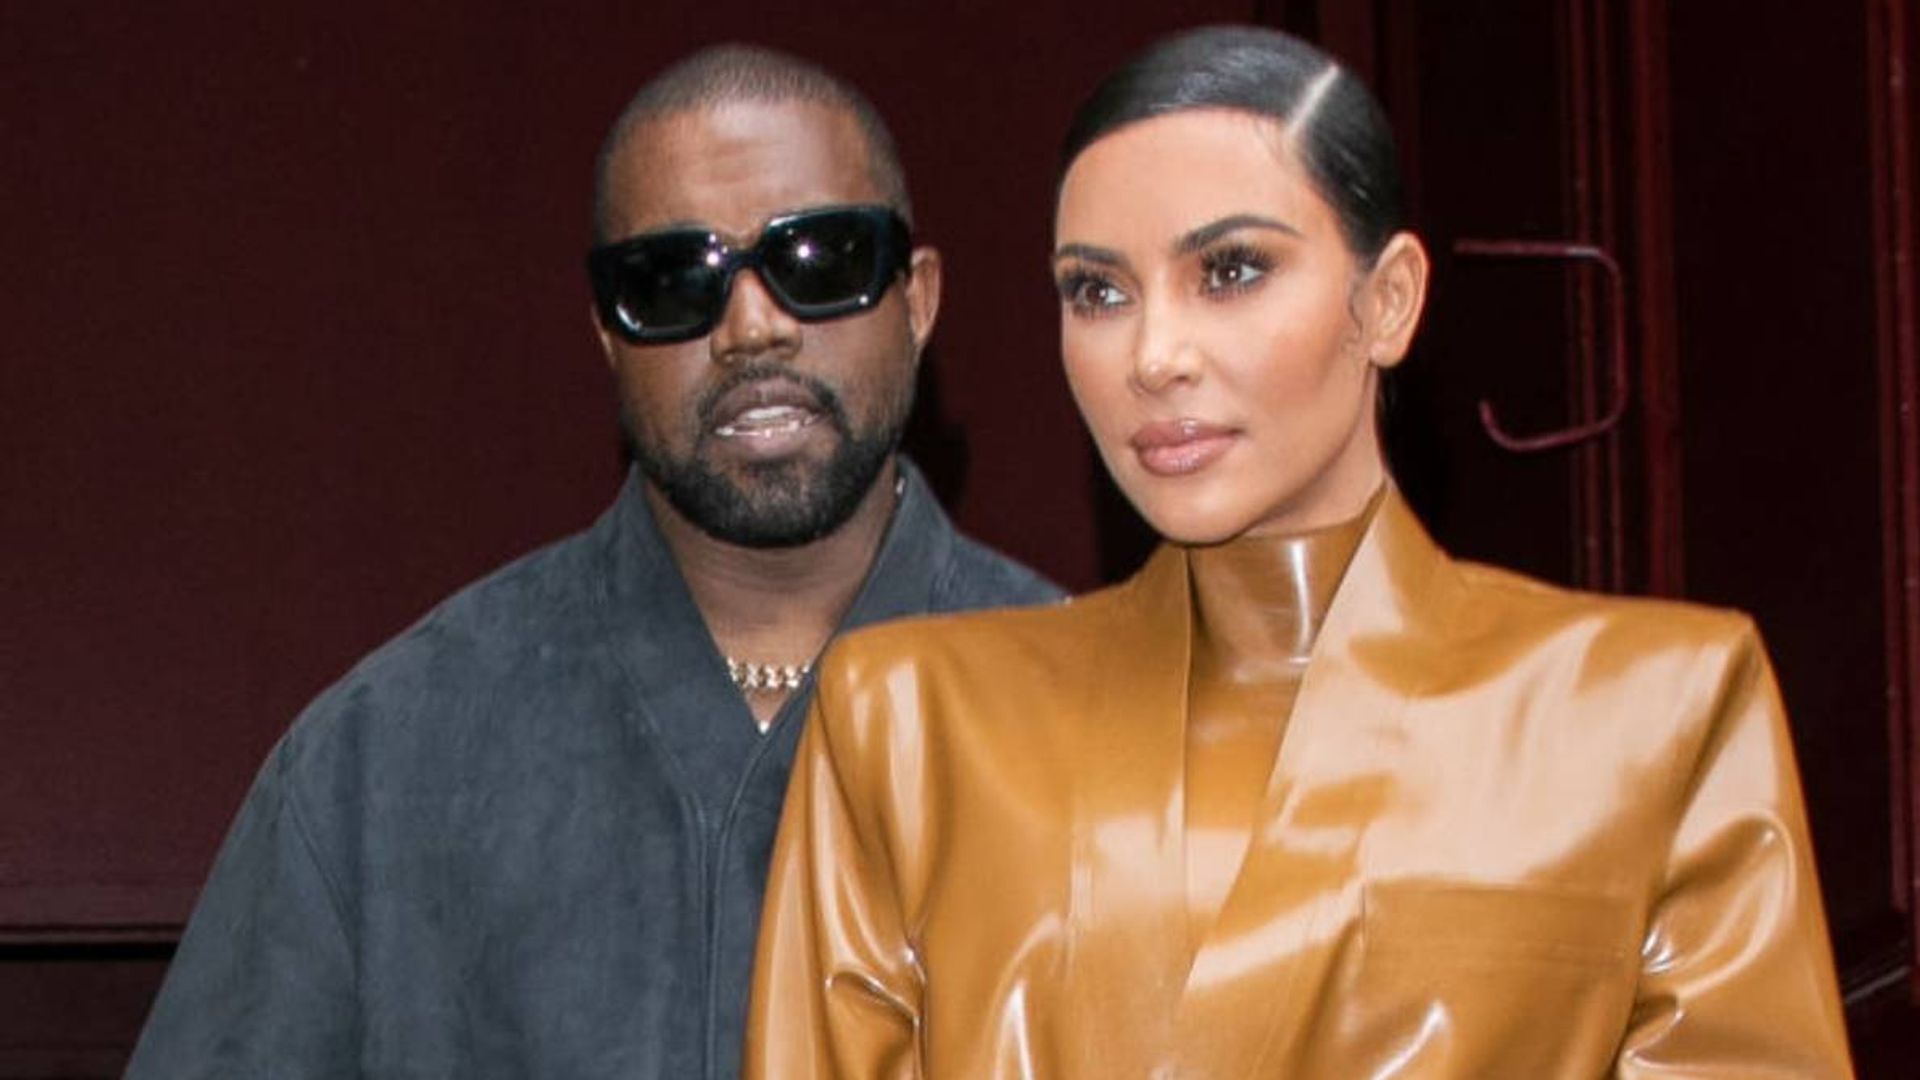 Kim Kardashian surprises fans with sentimental 'best gift ever' - but it's not from Kanye West